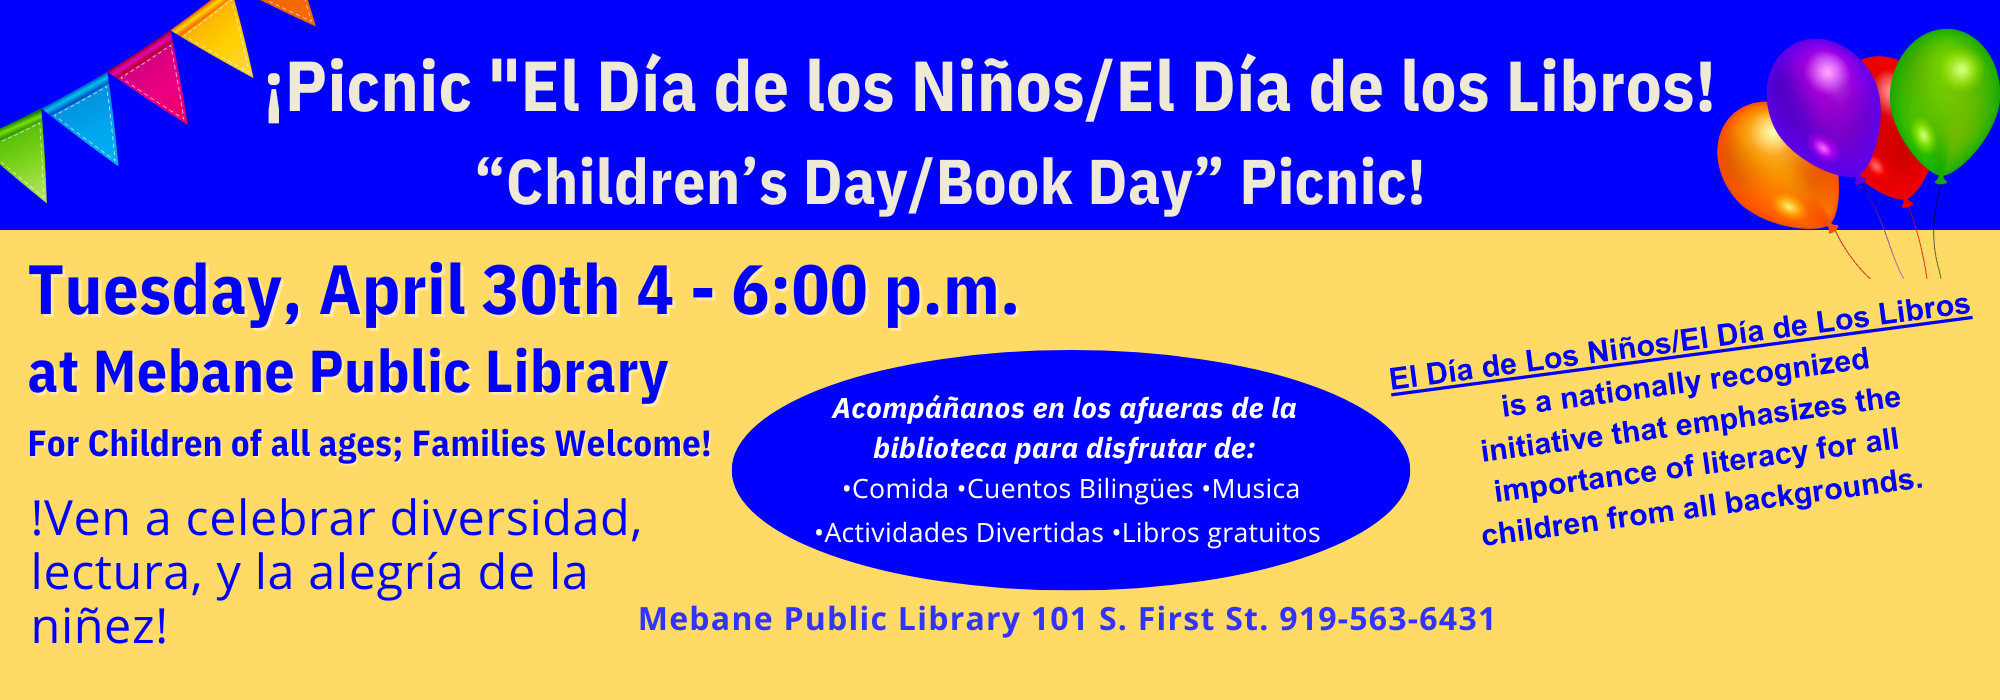 4.30 at 4 pm - Children's Day-Book Day at Mebane